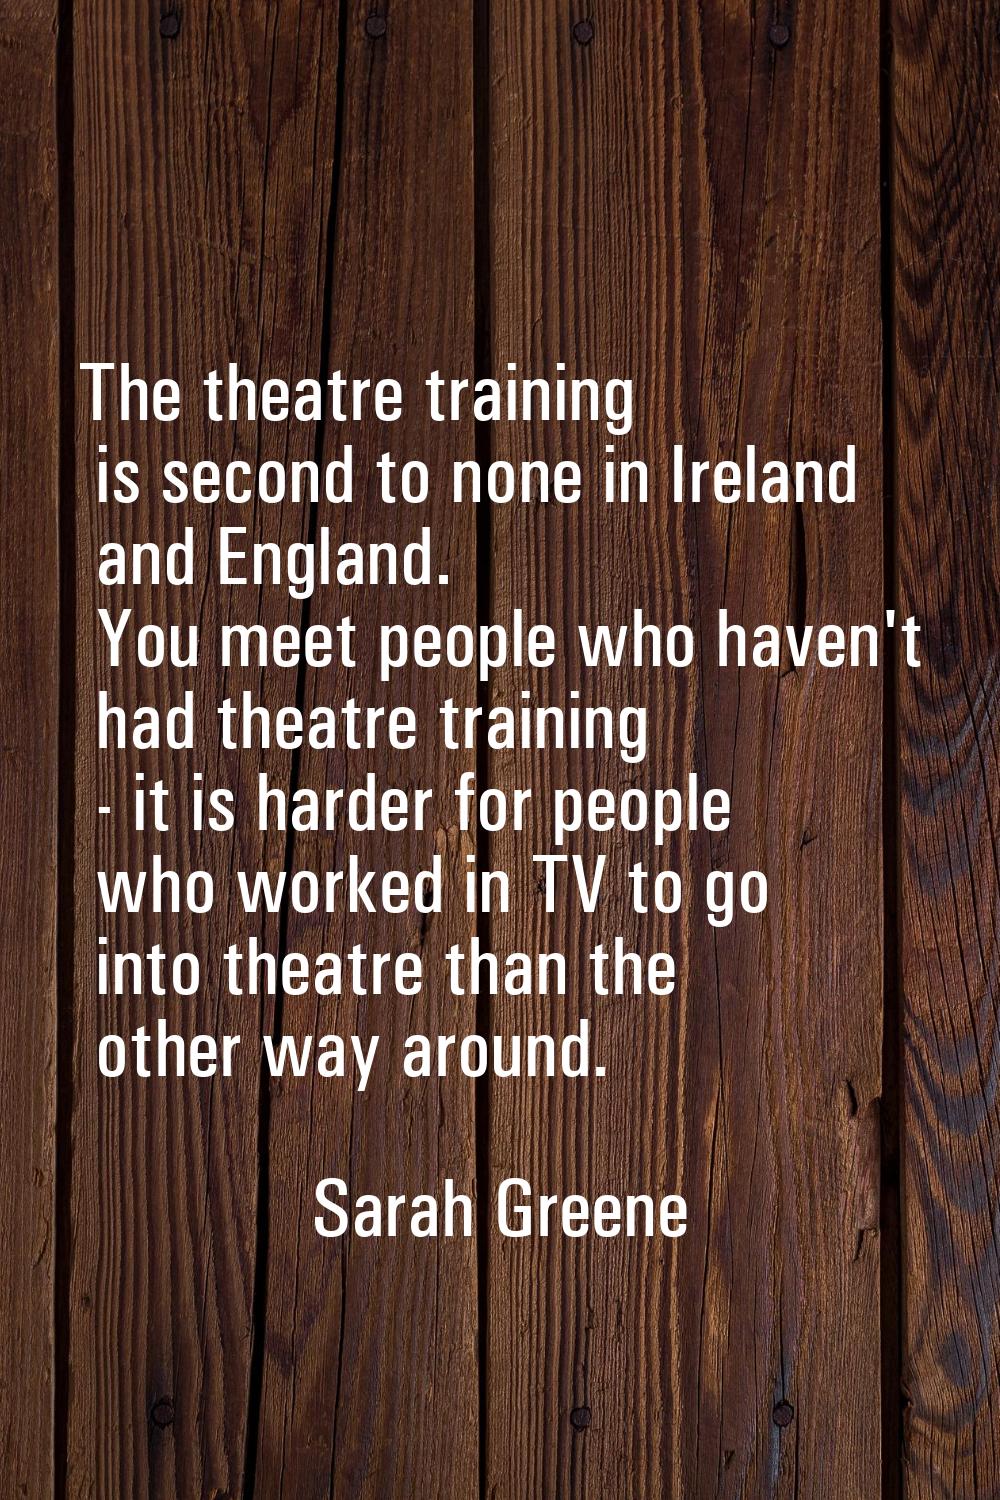 The theatre training is second to none in Ireland and England. You meet people who haven't had thea